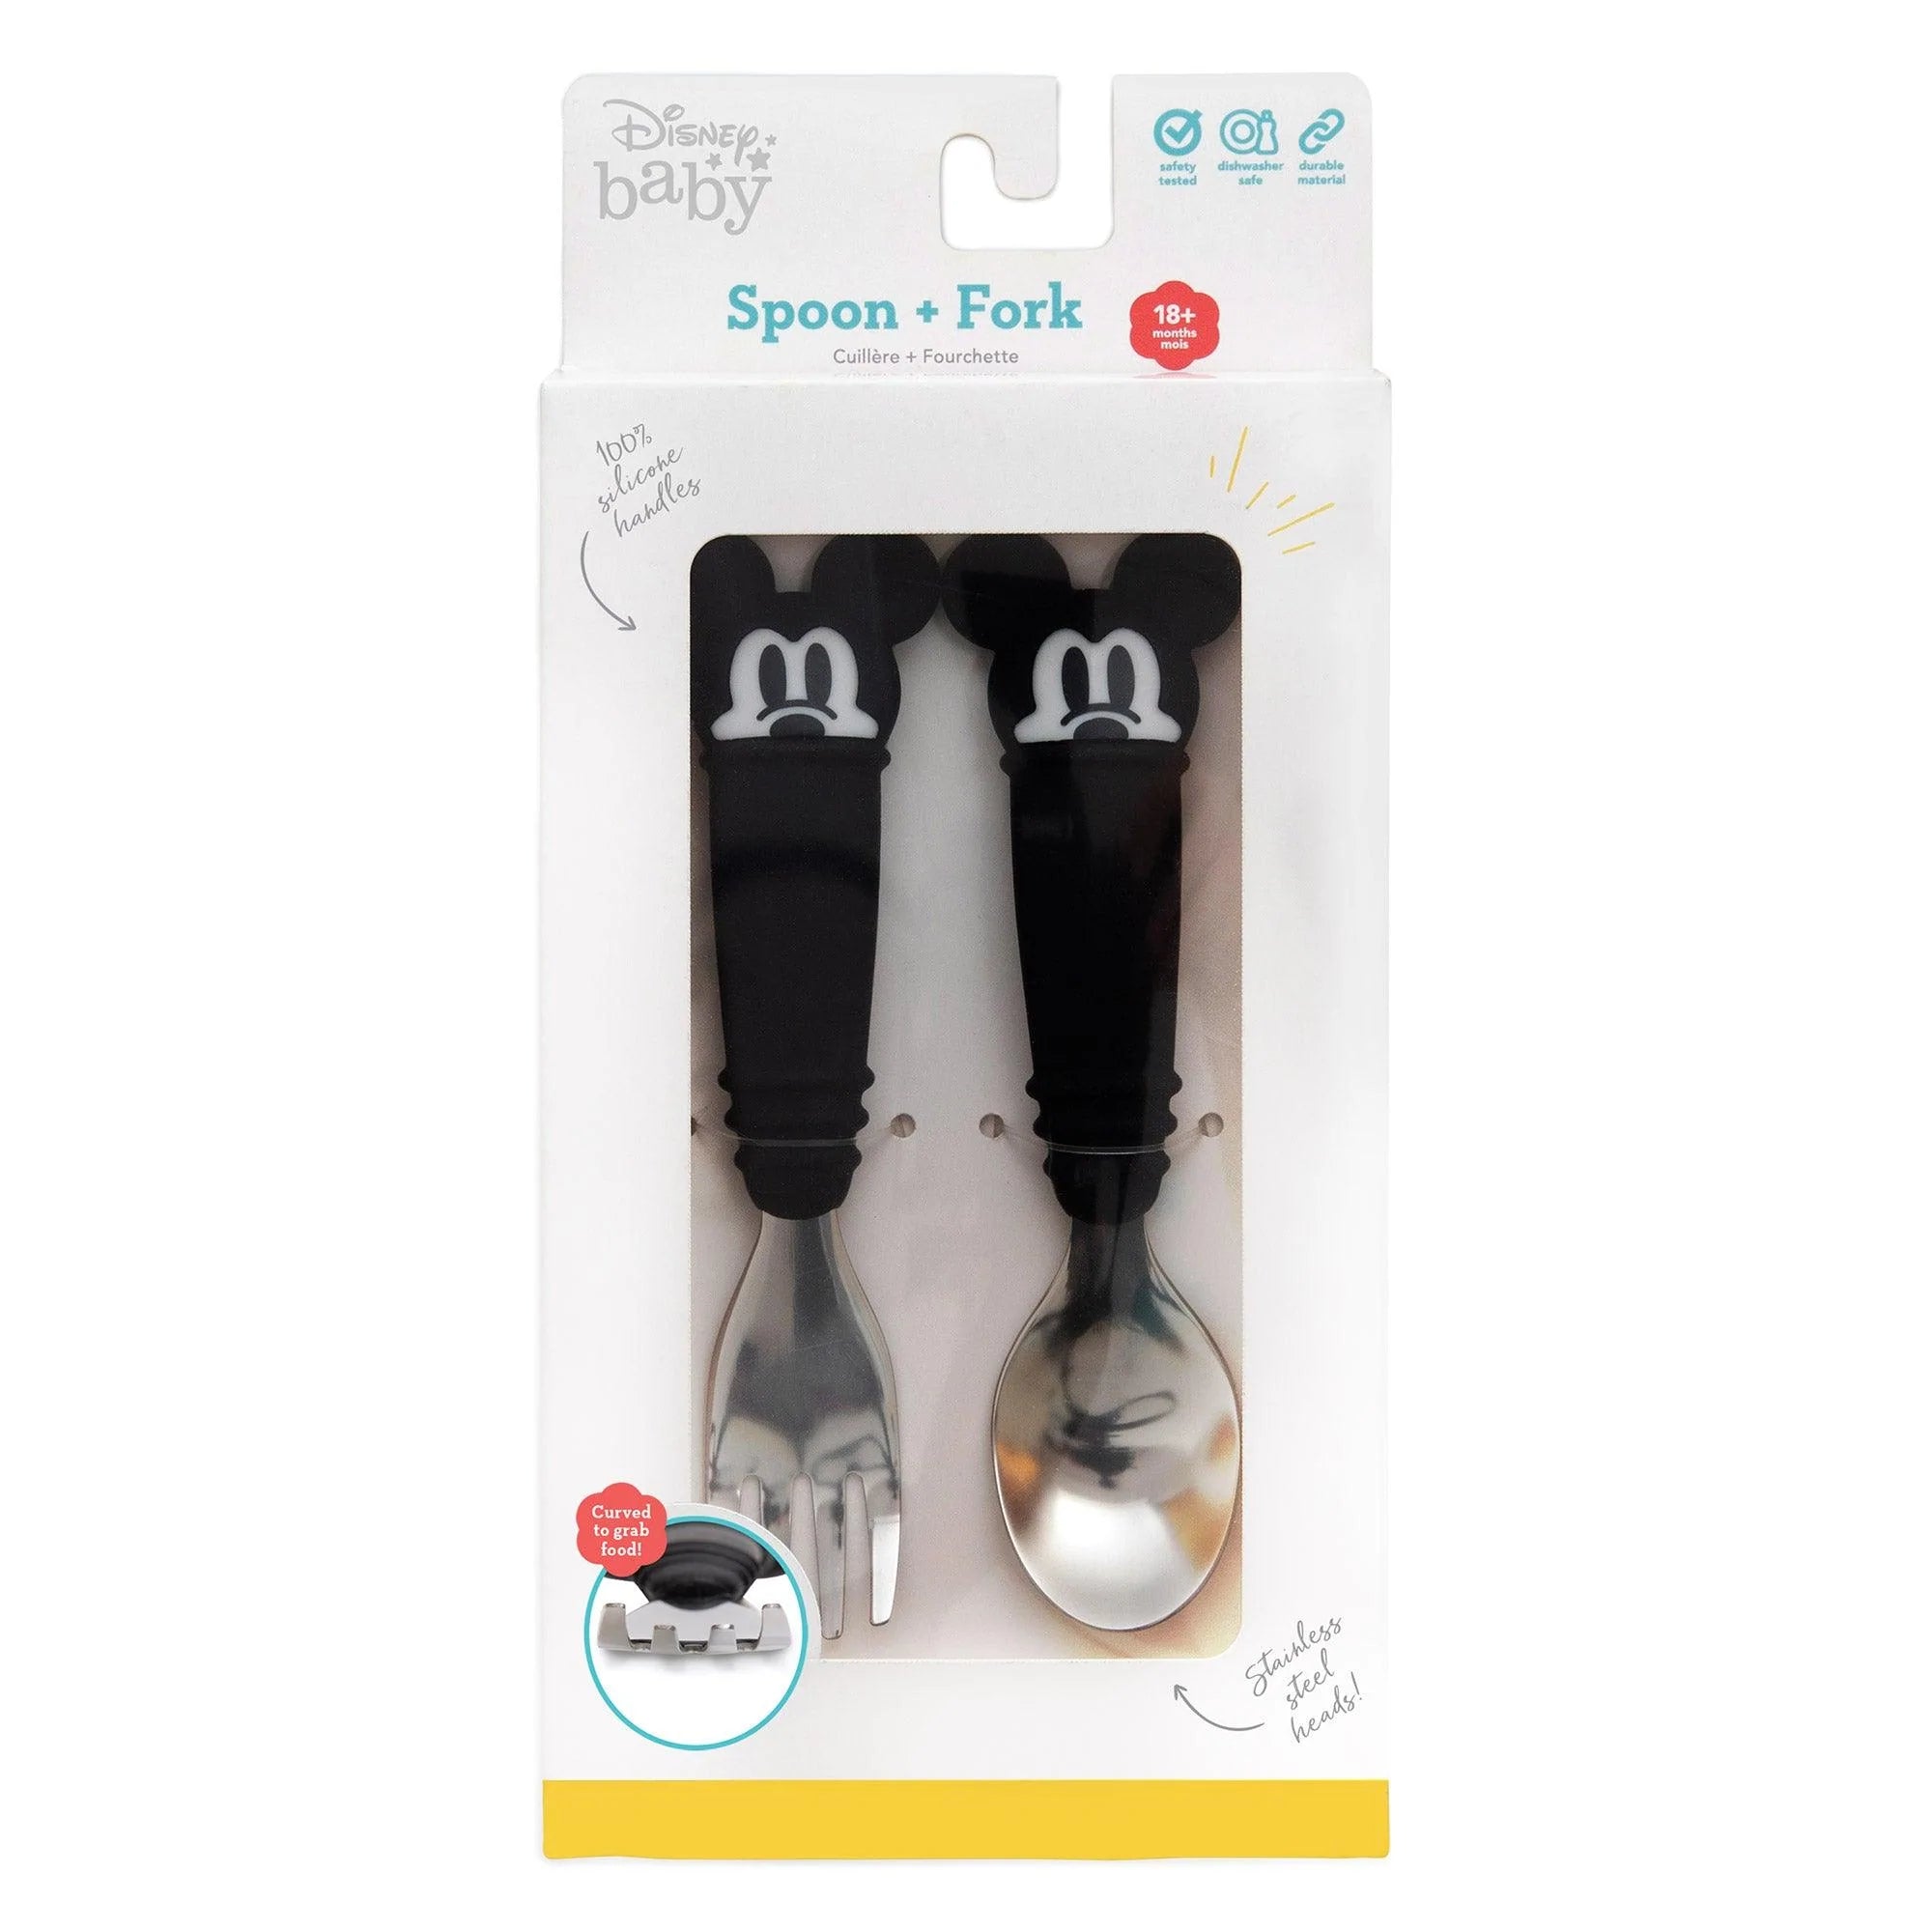 Disney Baby Mickey Mouse 2-pc. Silicone Dipping Spoons Set - Blue/Black - One Size